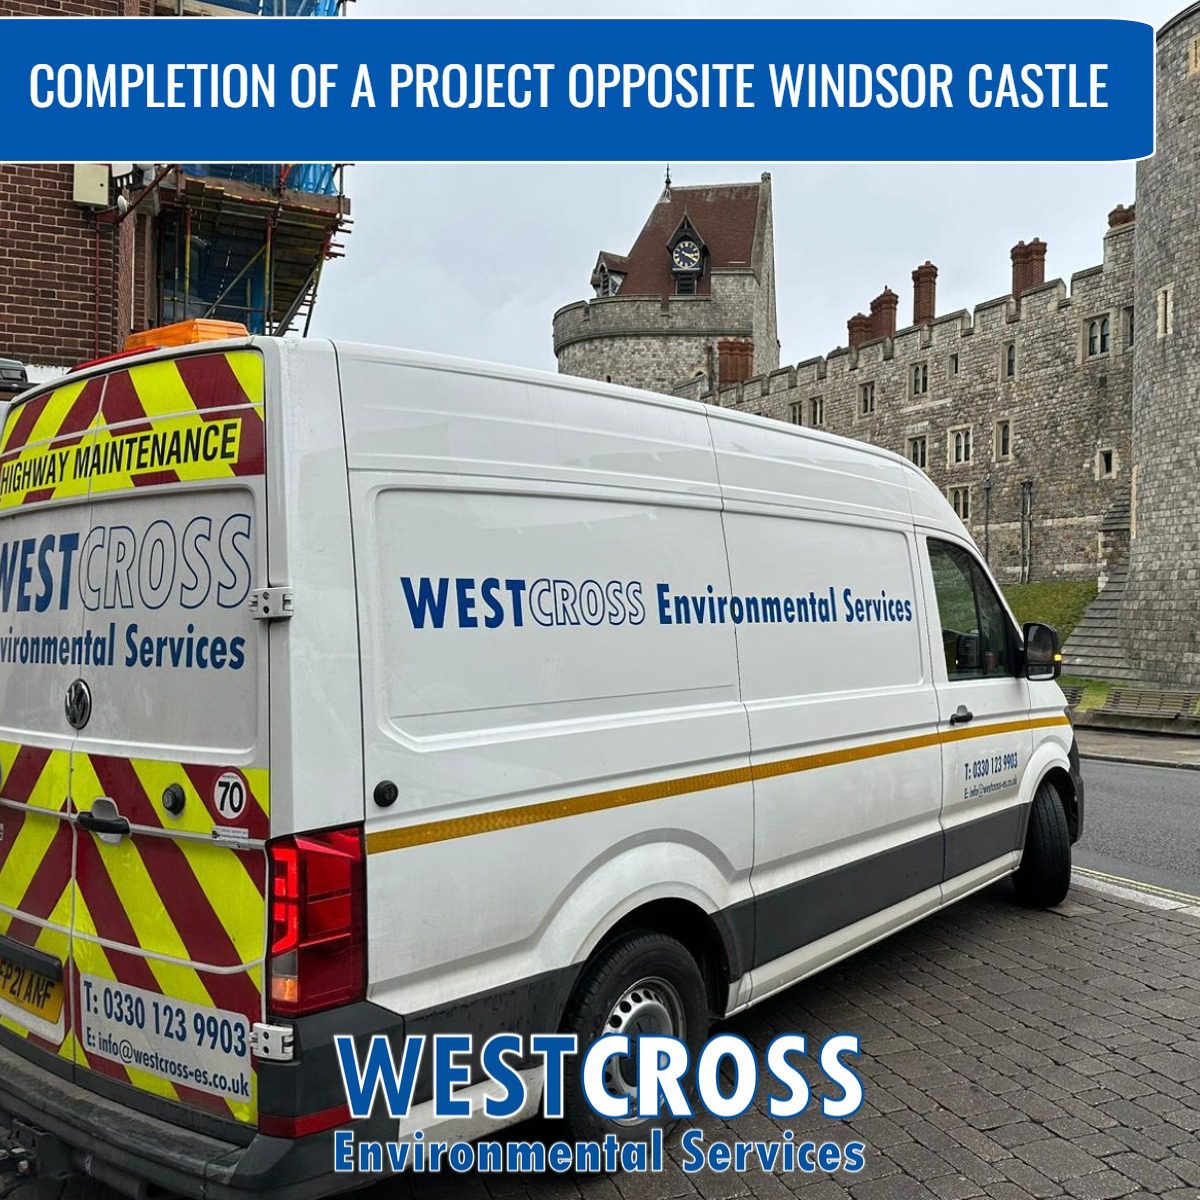 Completion of an asbestos removal project opposite Windsor Castle